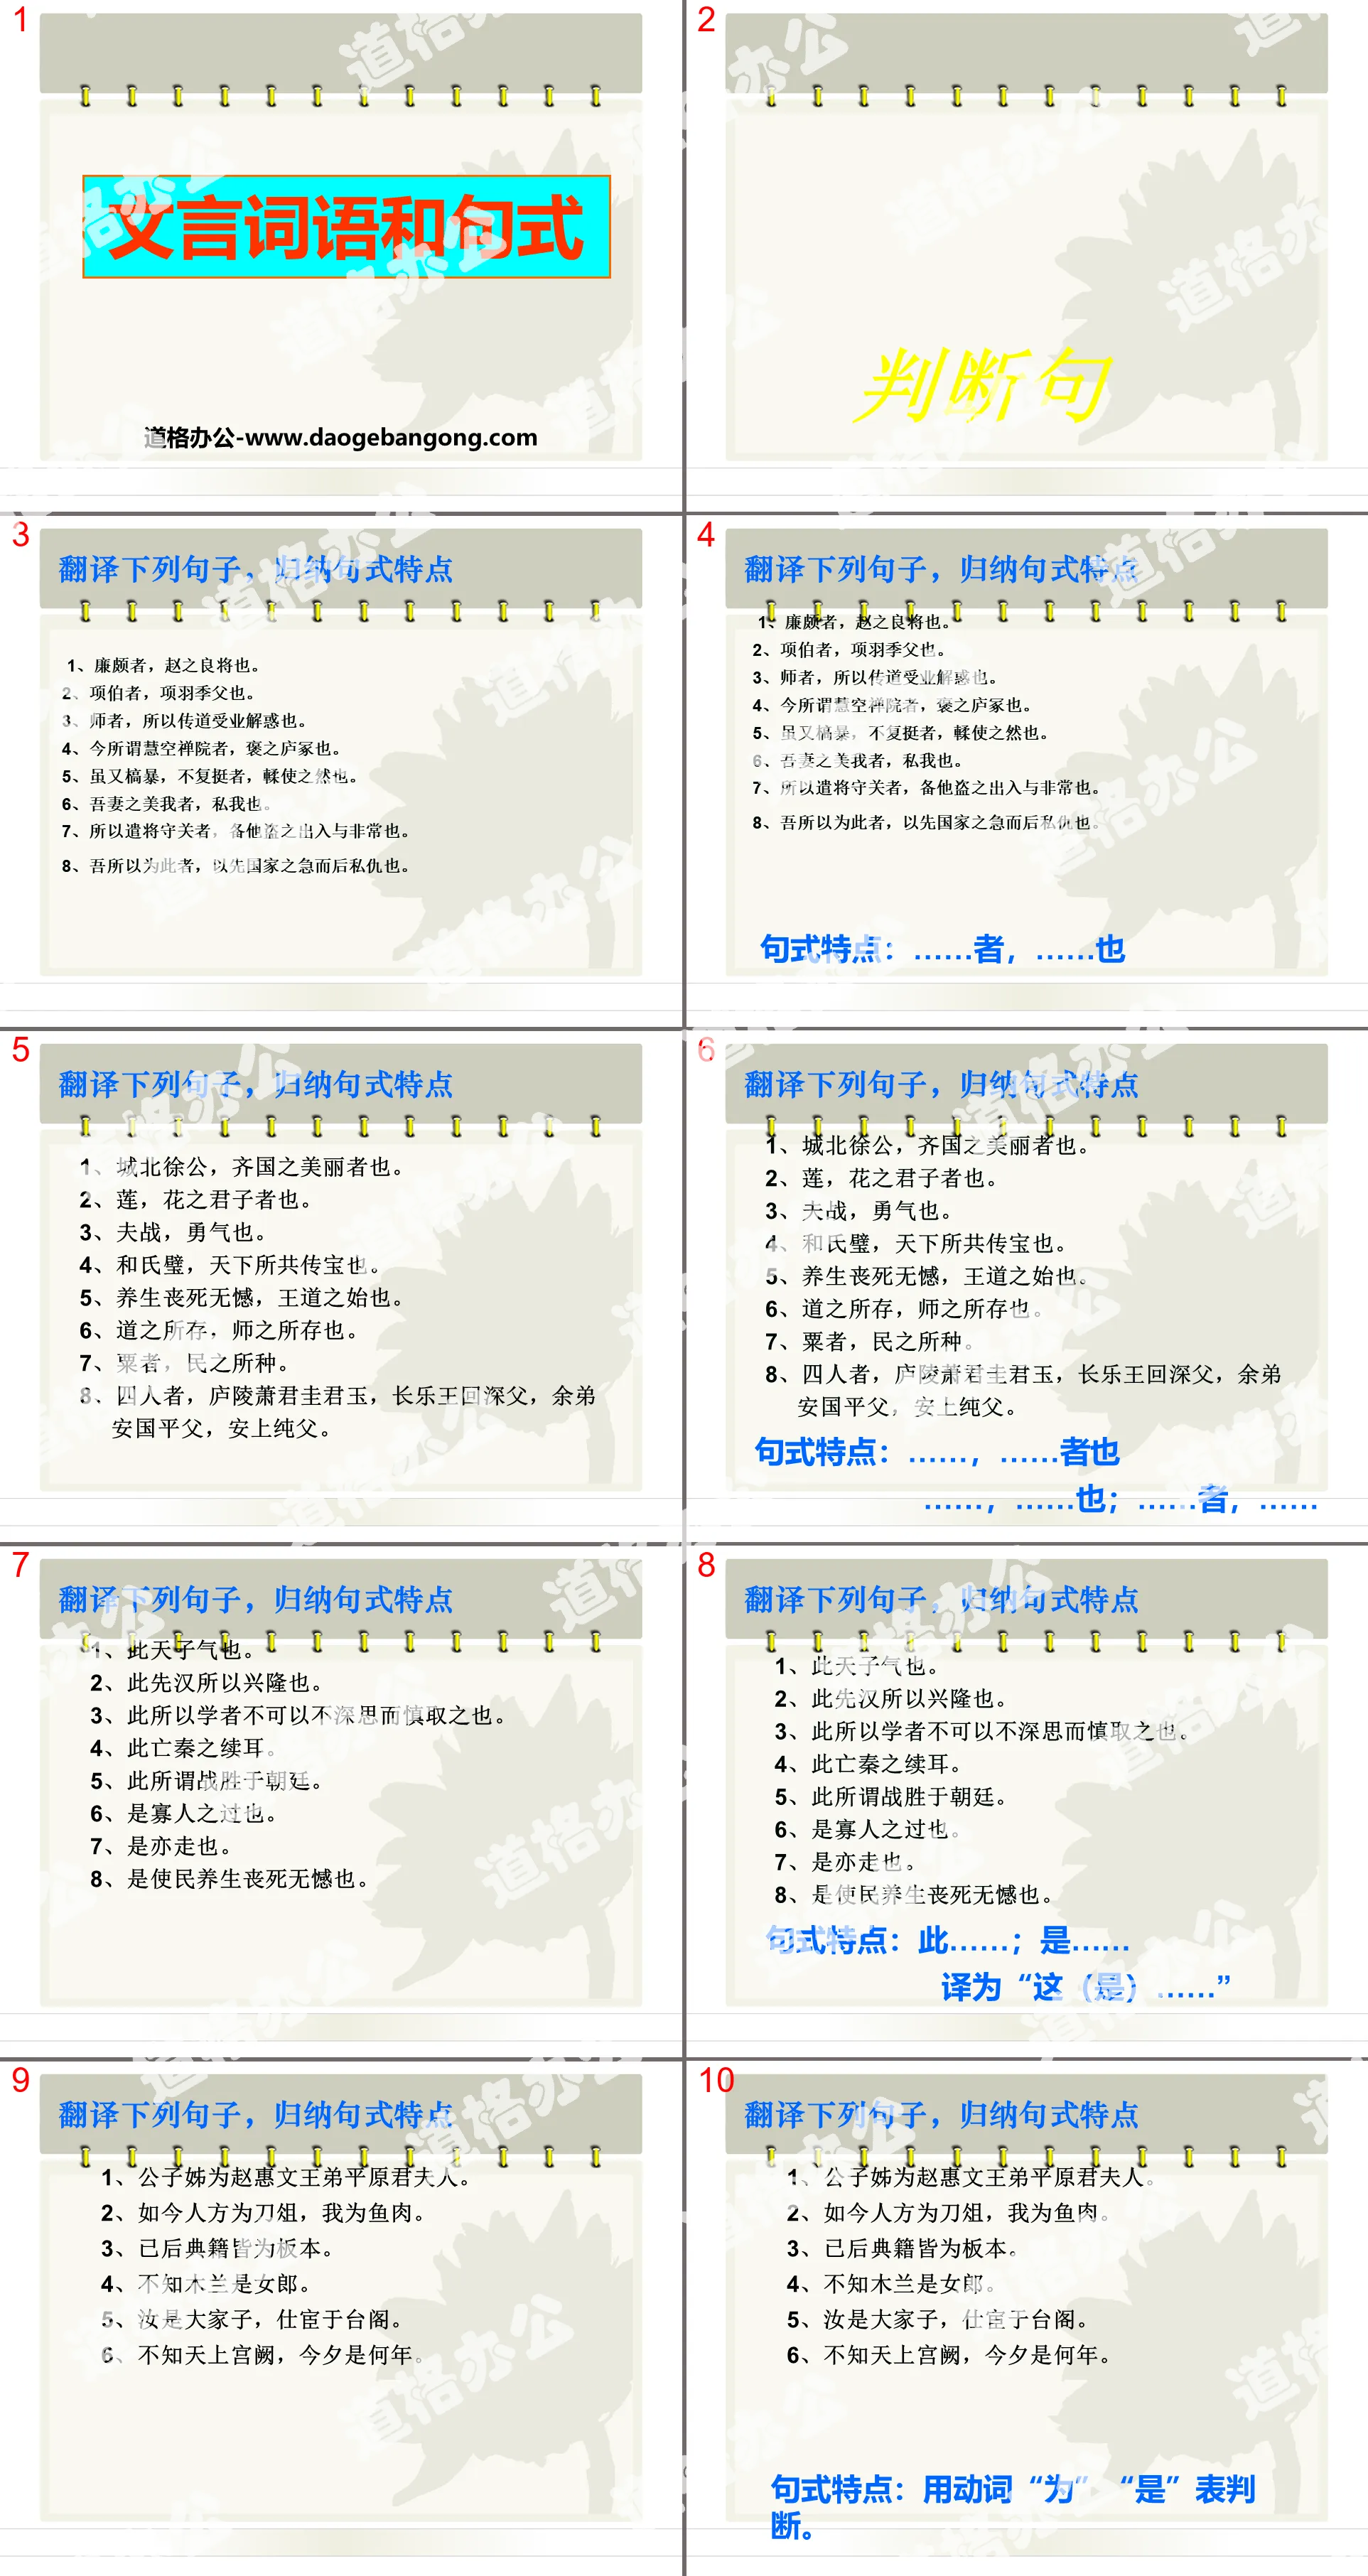 "Classical Chinese Words and Sentence Patterns" PPT courseware